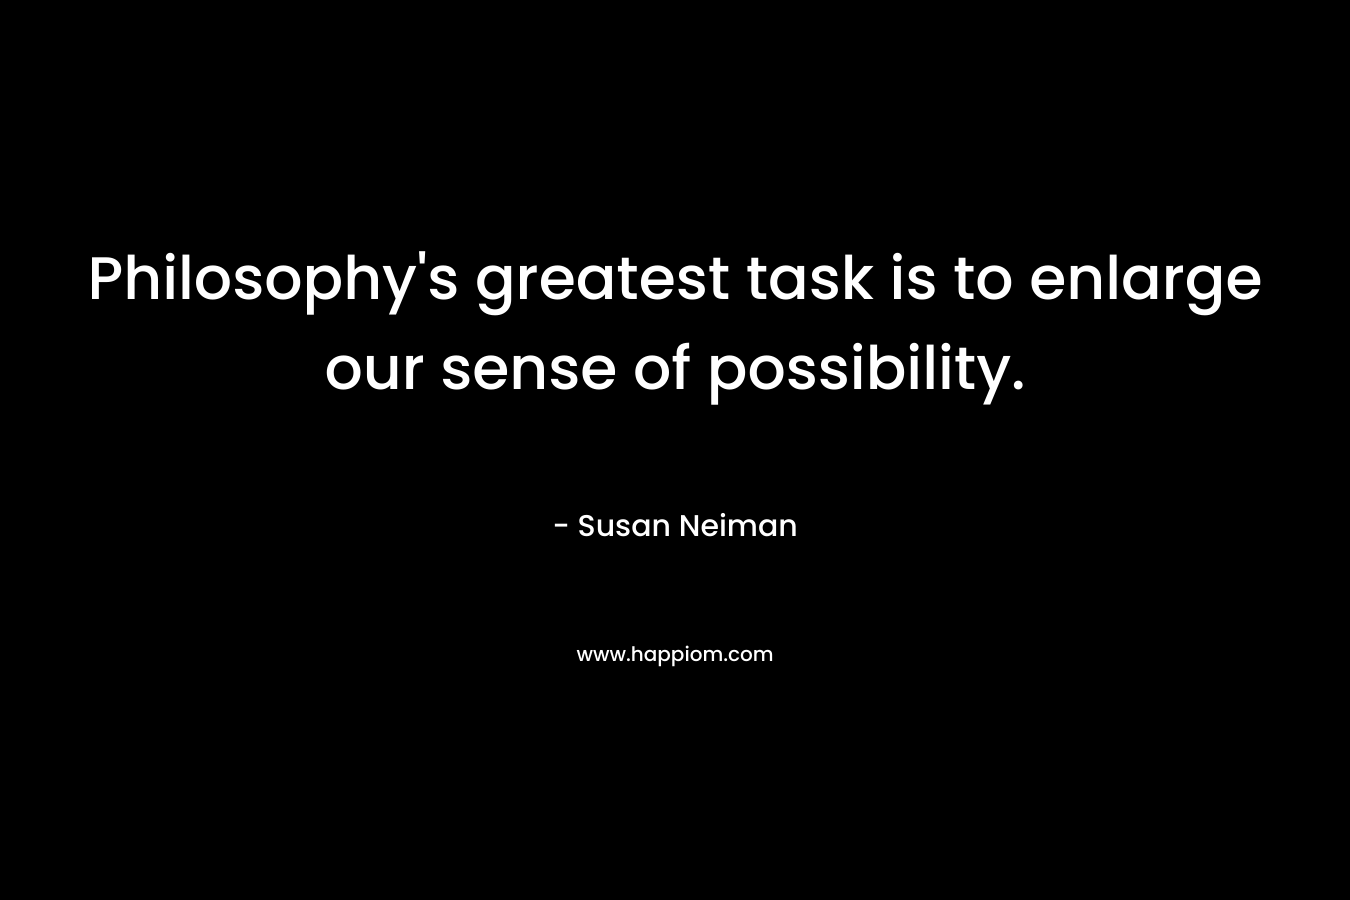 Philosophy’s greatest task is to enlarge our sense of possibility. – Susan Neiman